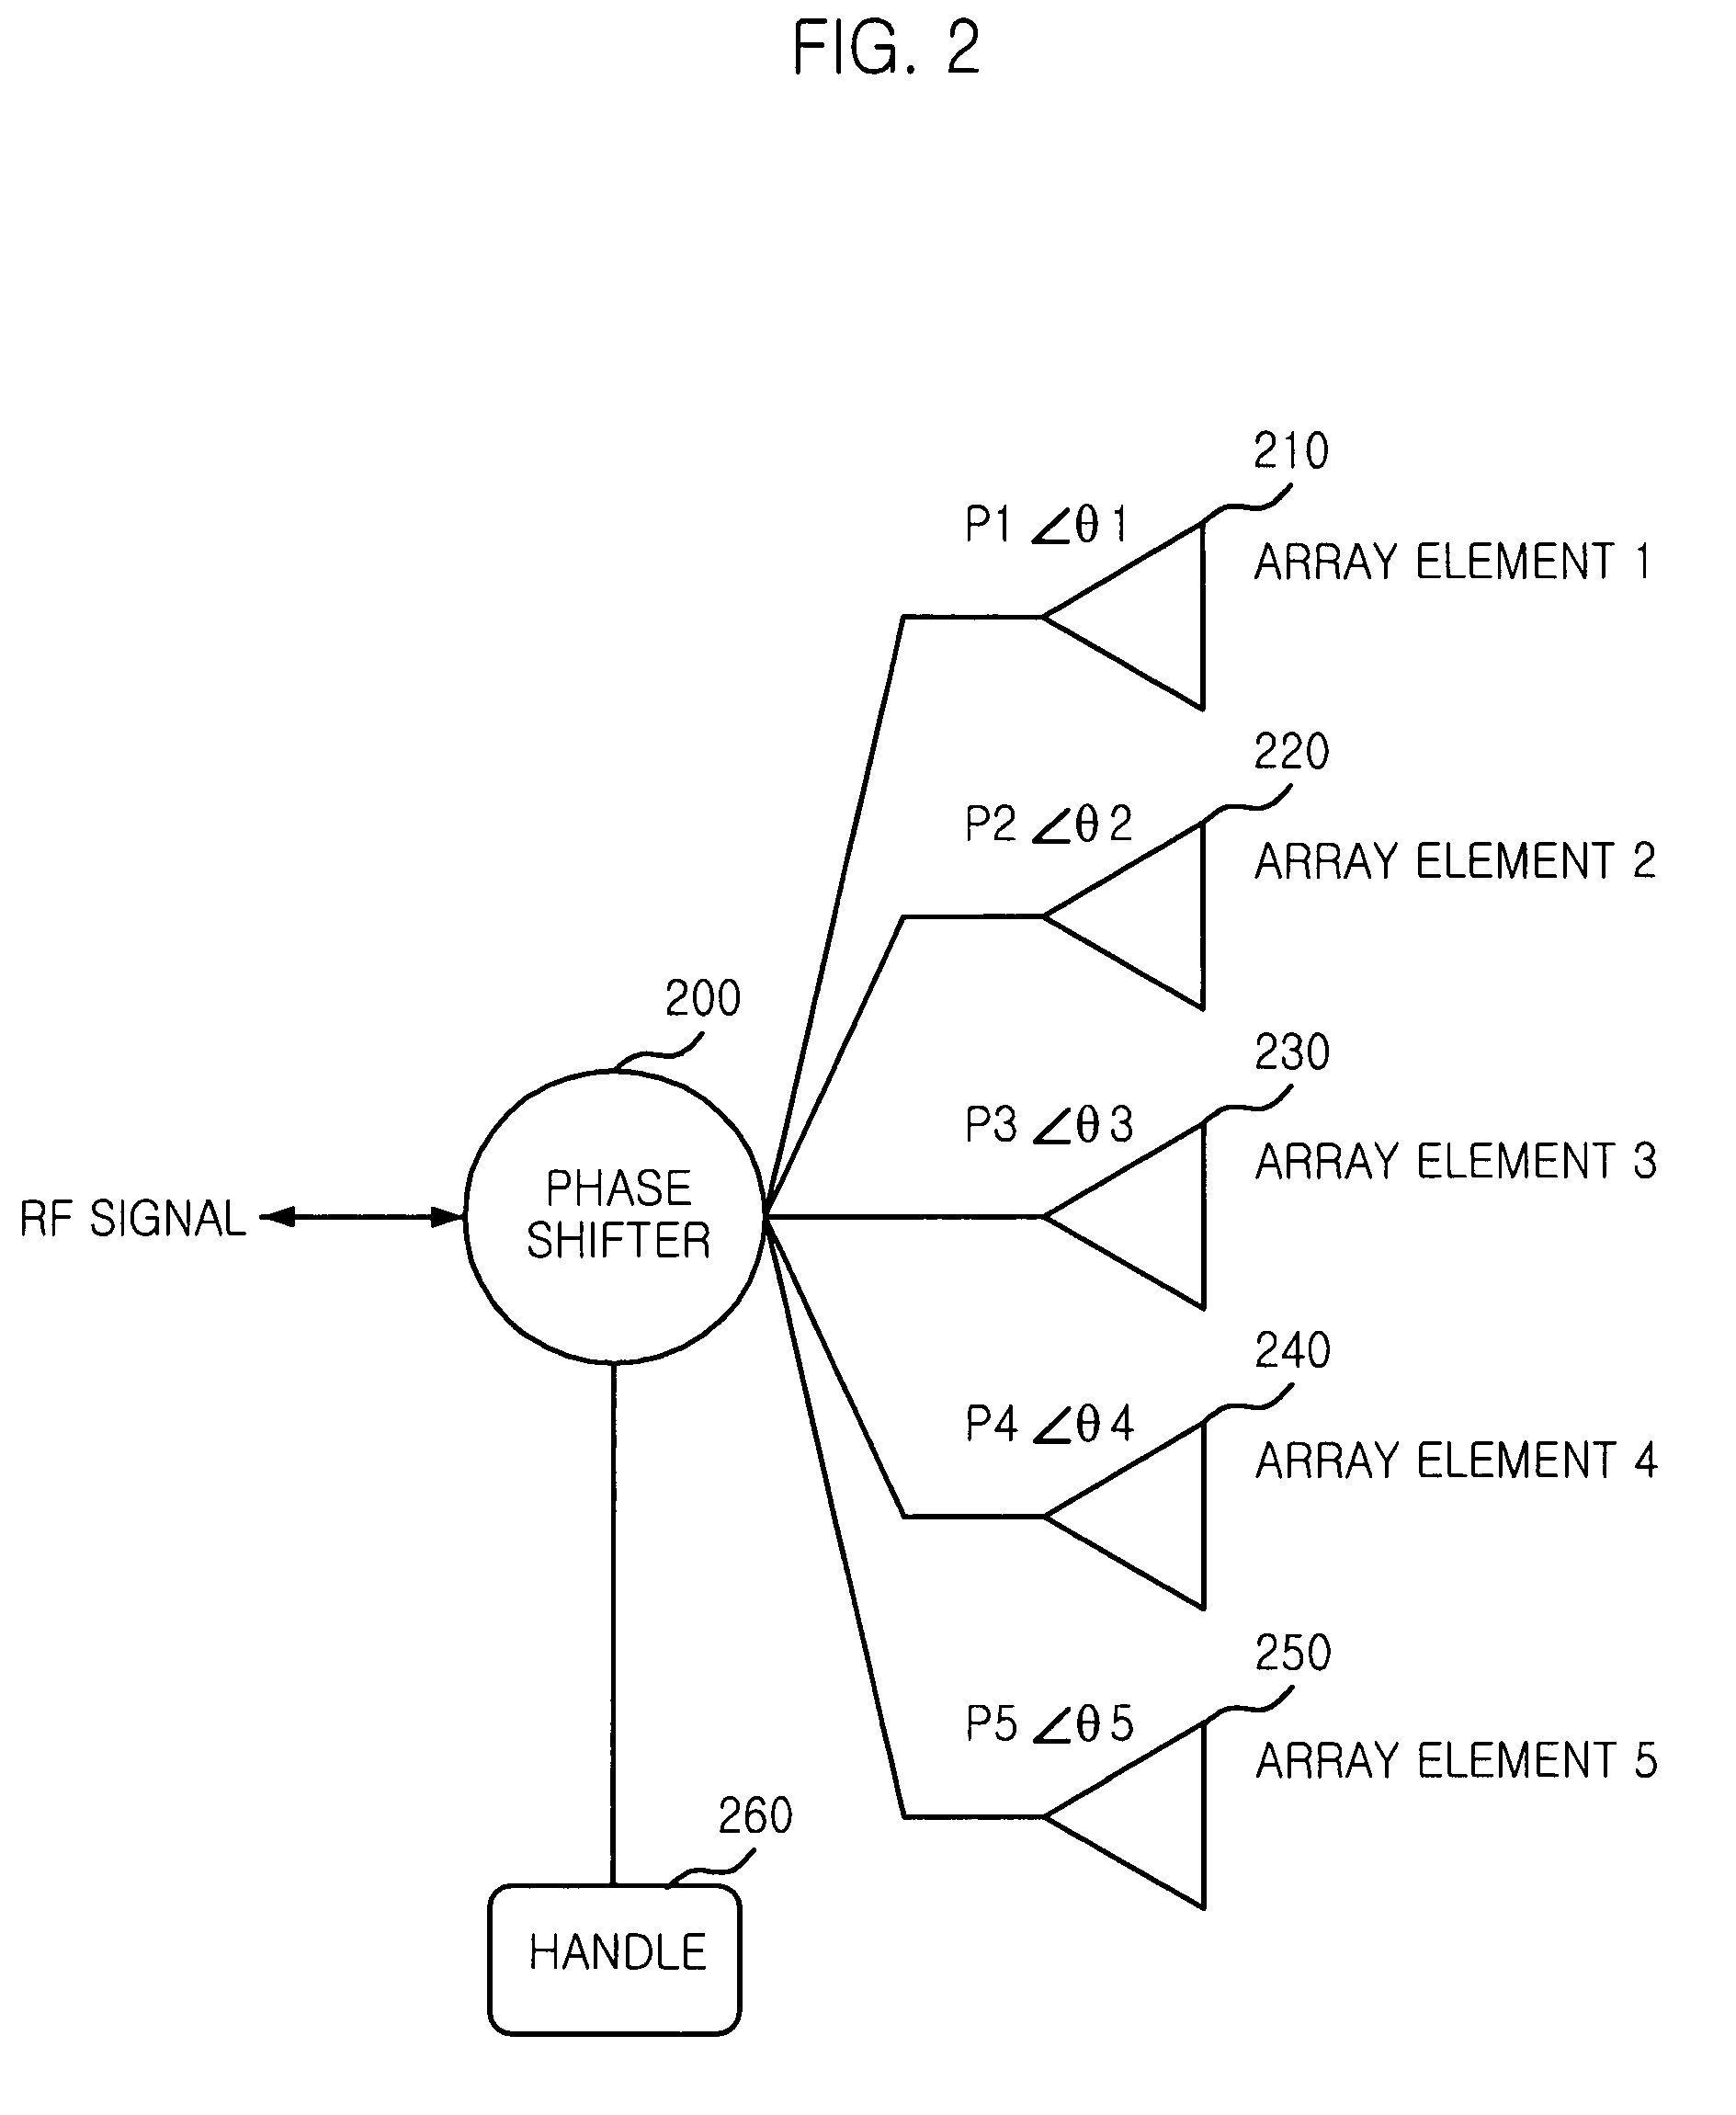 Phase shifter having power dividing function for providing a fixed phase shift and at least two phase shifts based on path length